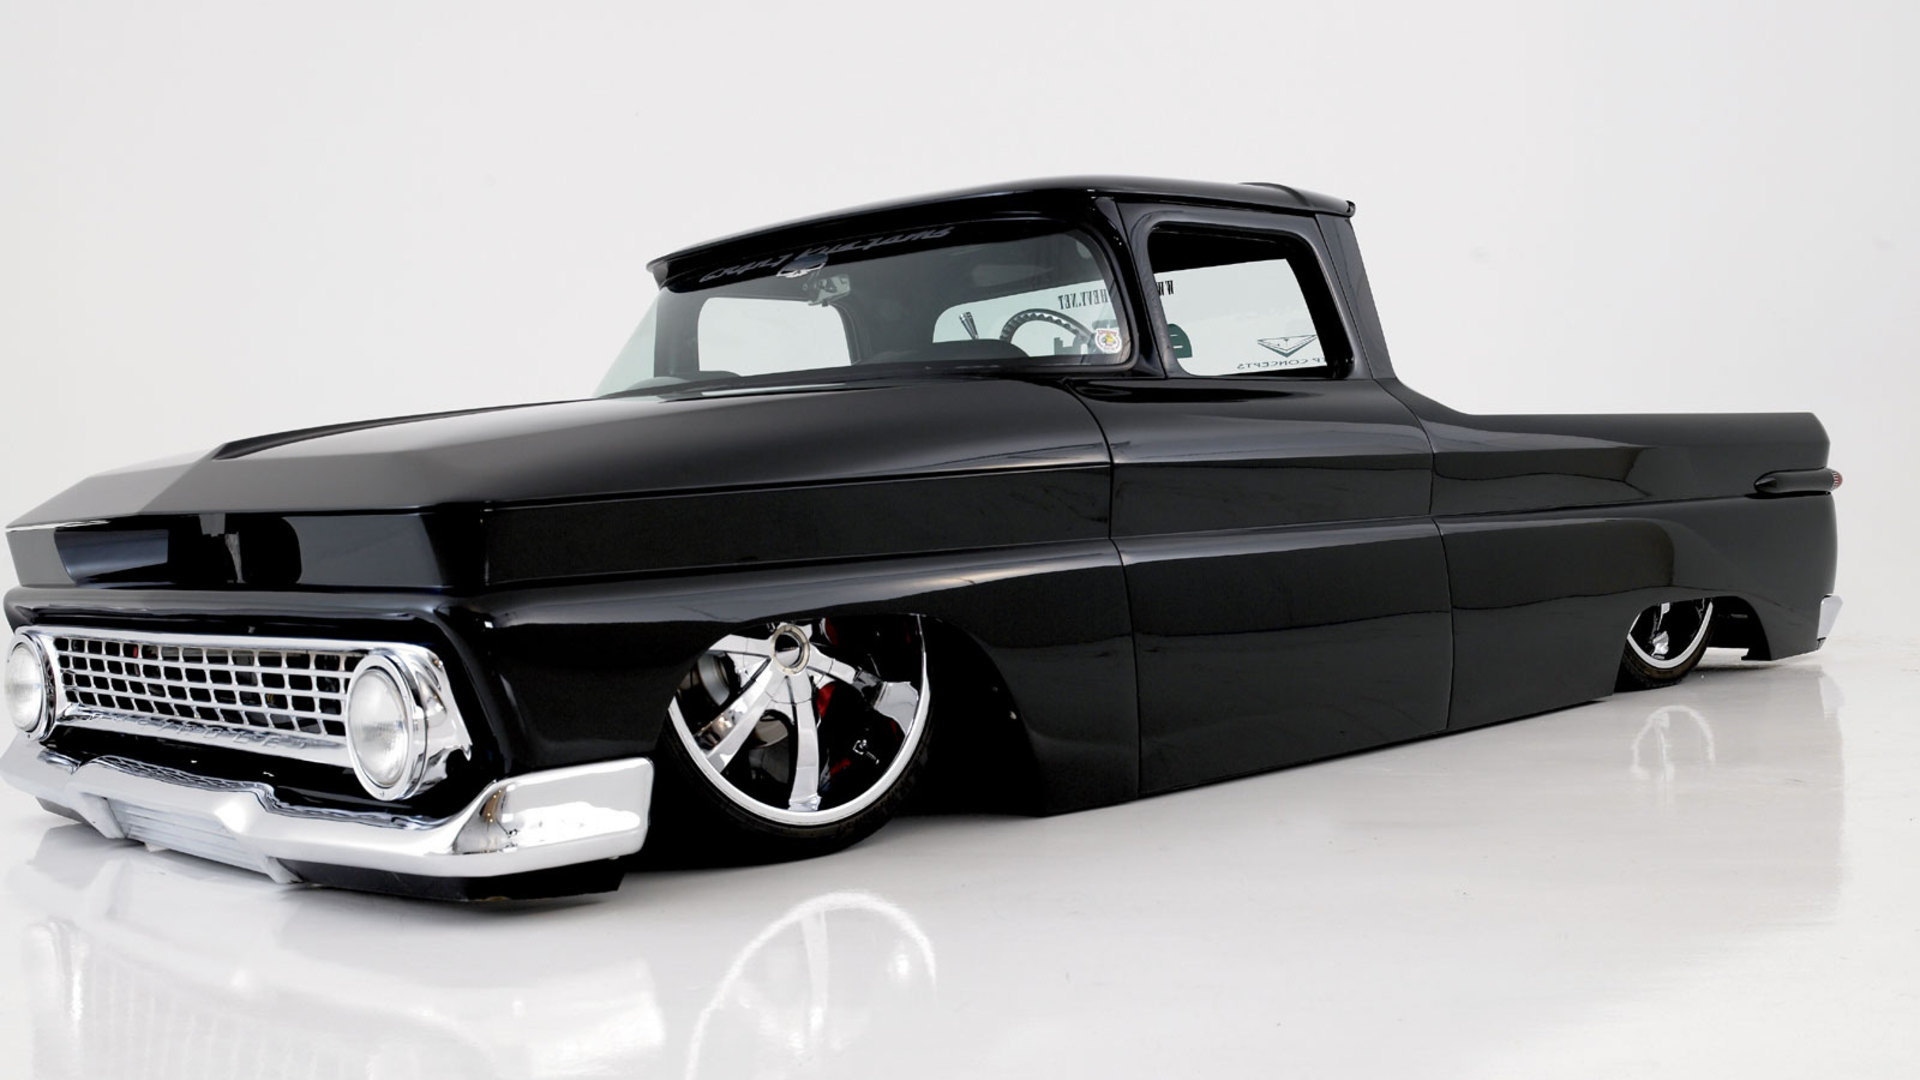 Popular Lowrider Image for Phone